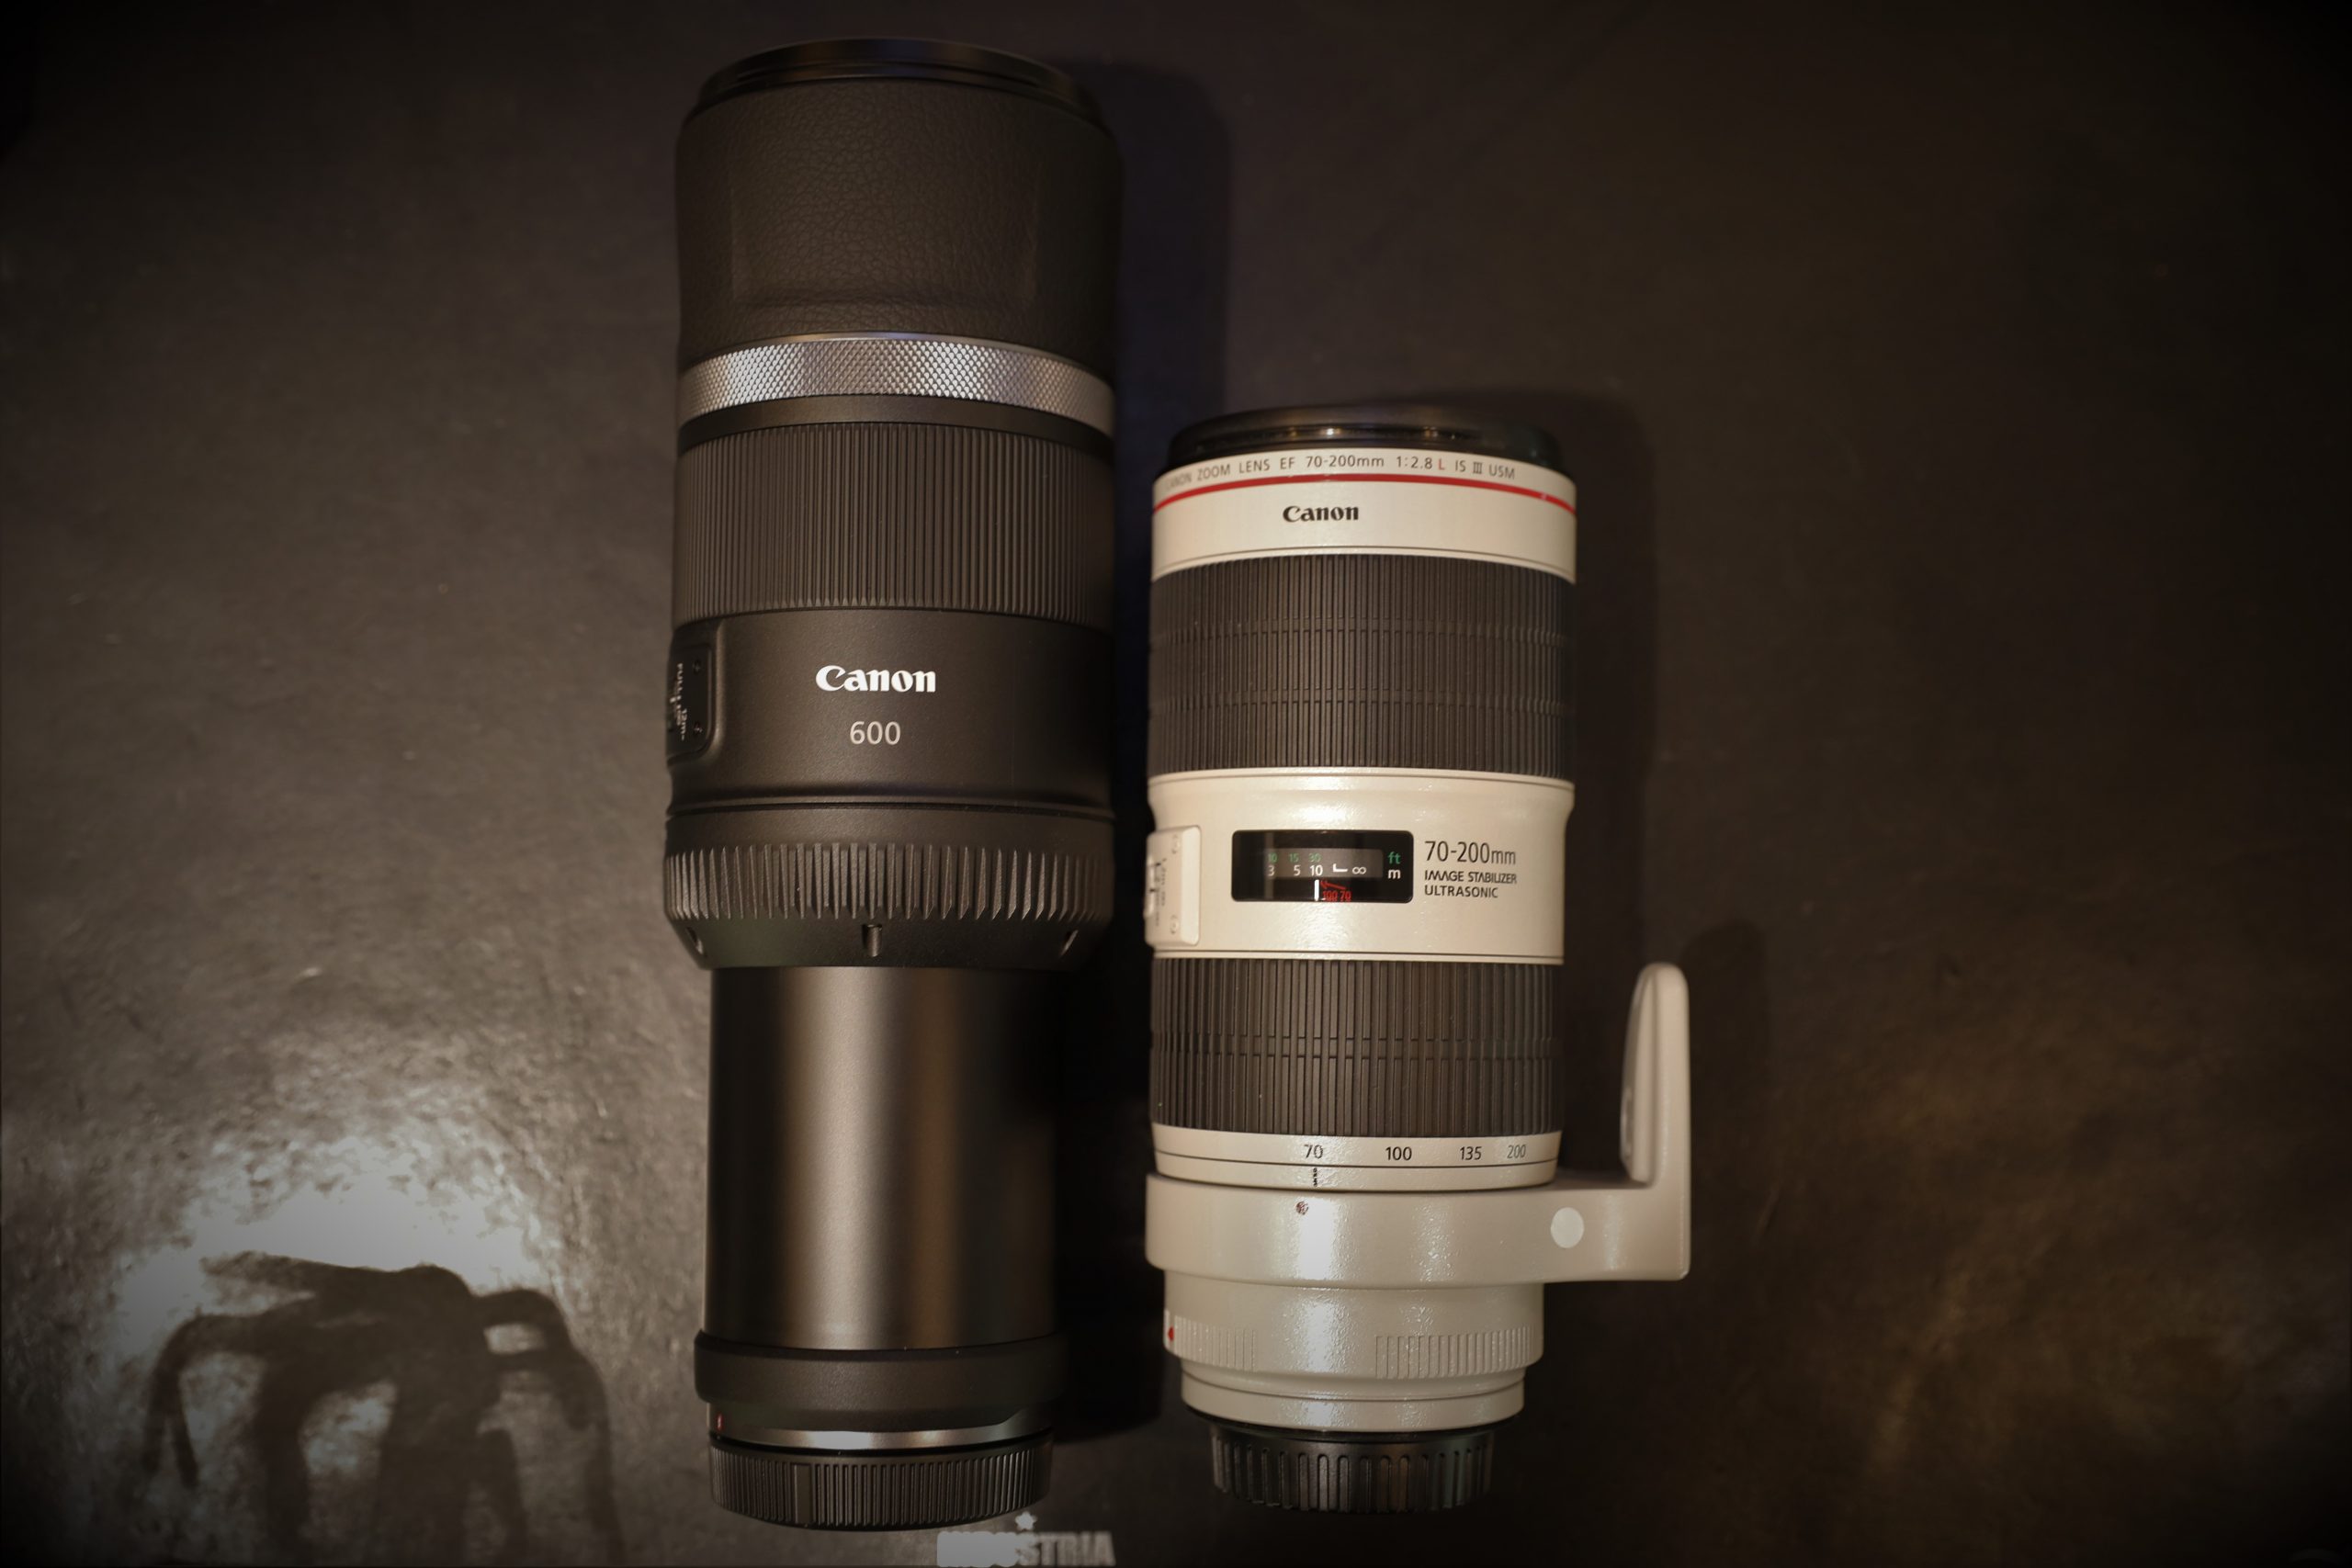 Canon】R STYLE～RF600mm F11 IS STM × Motorsports photo～ | THE MAP 